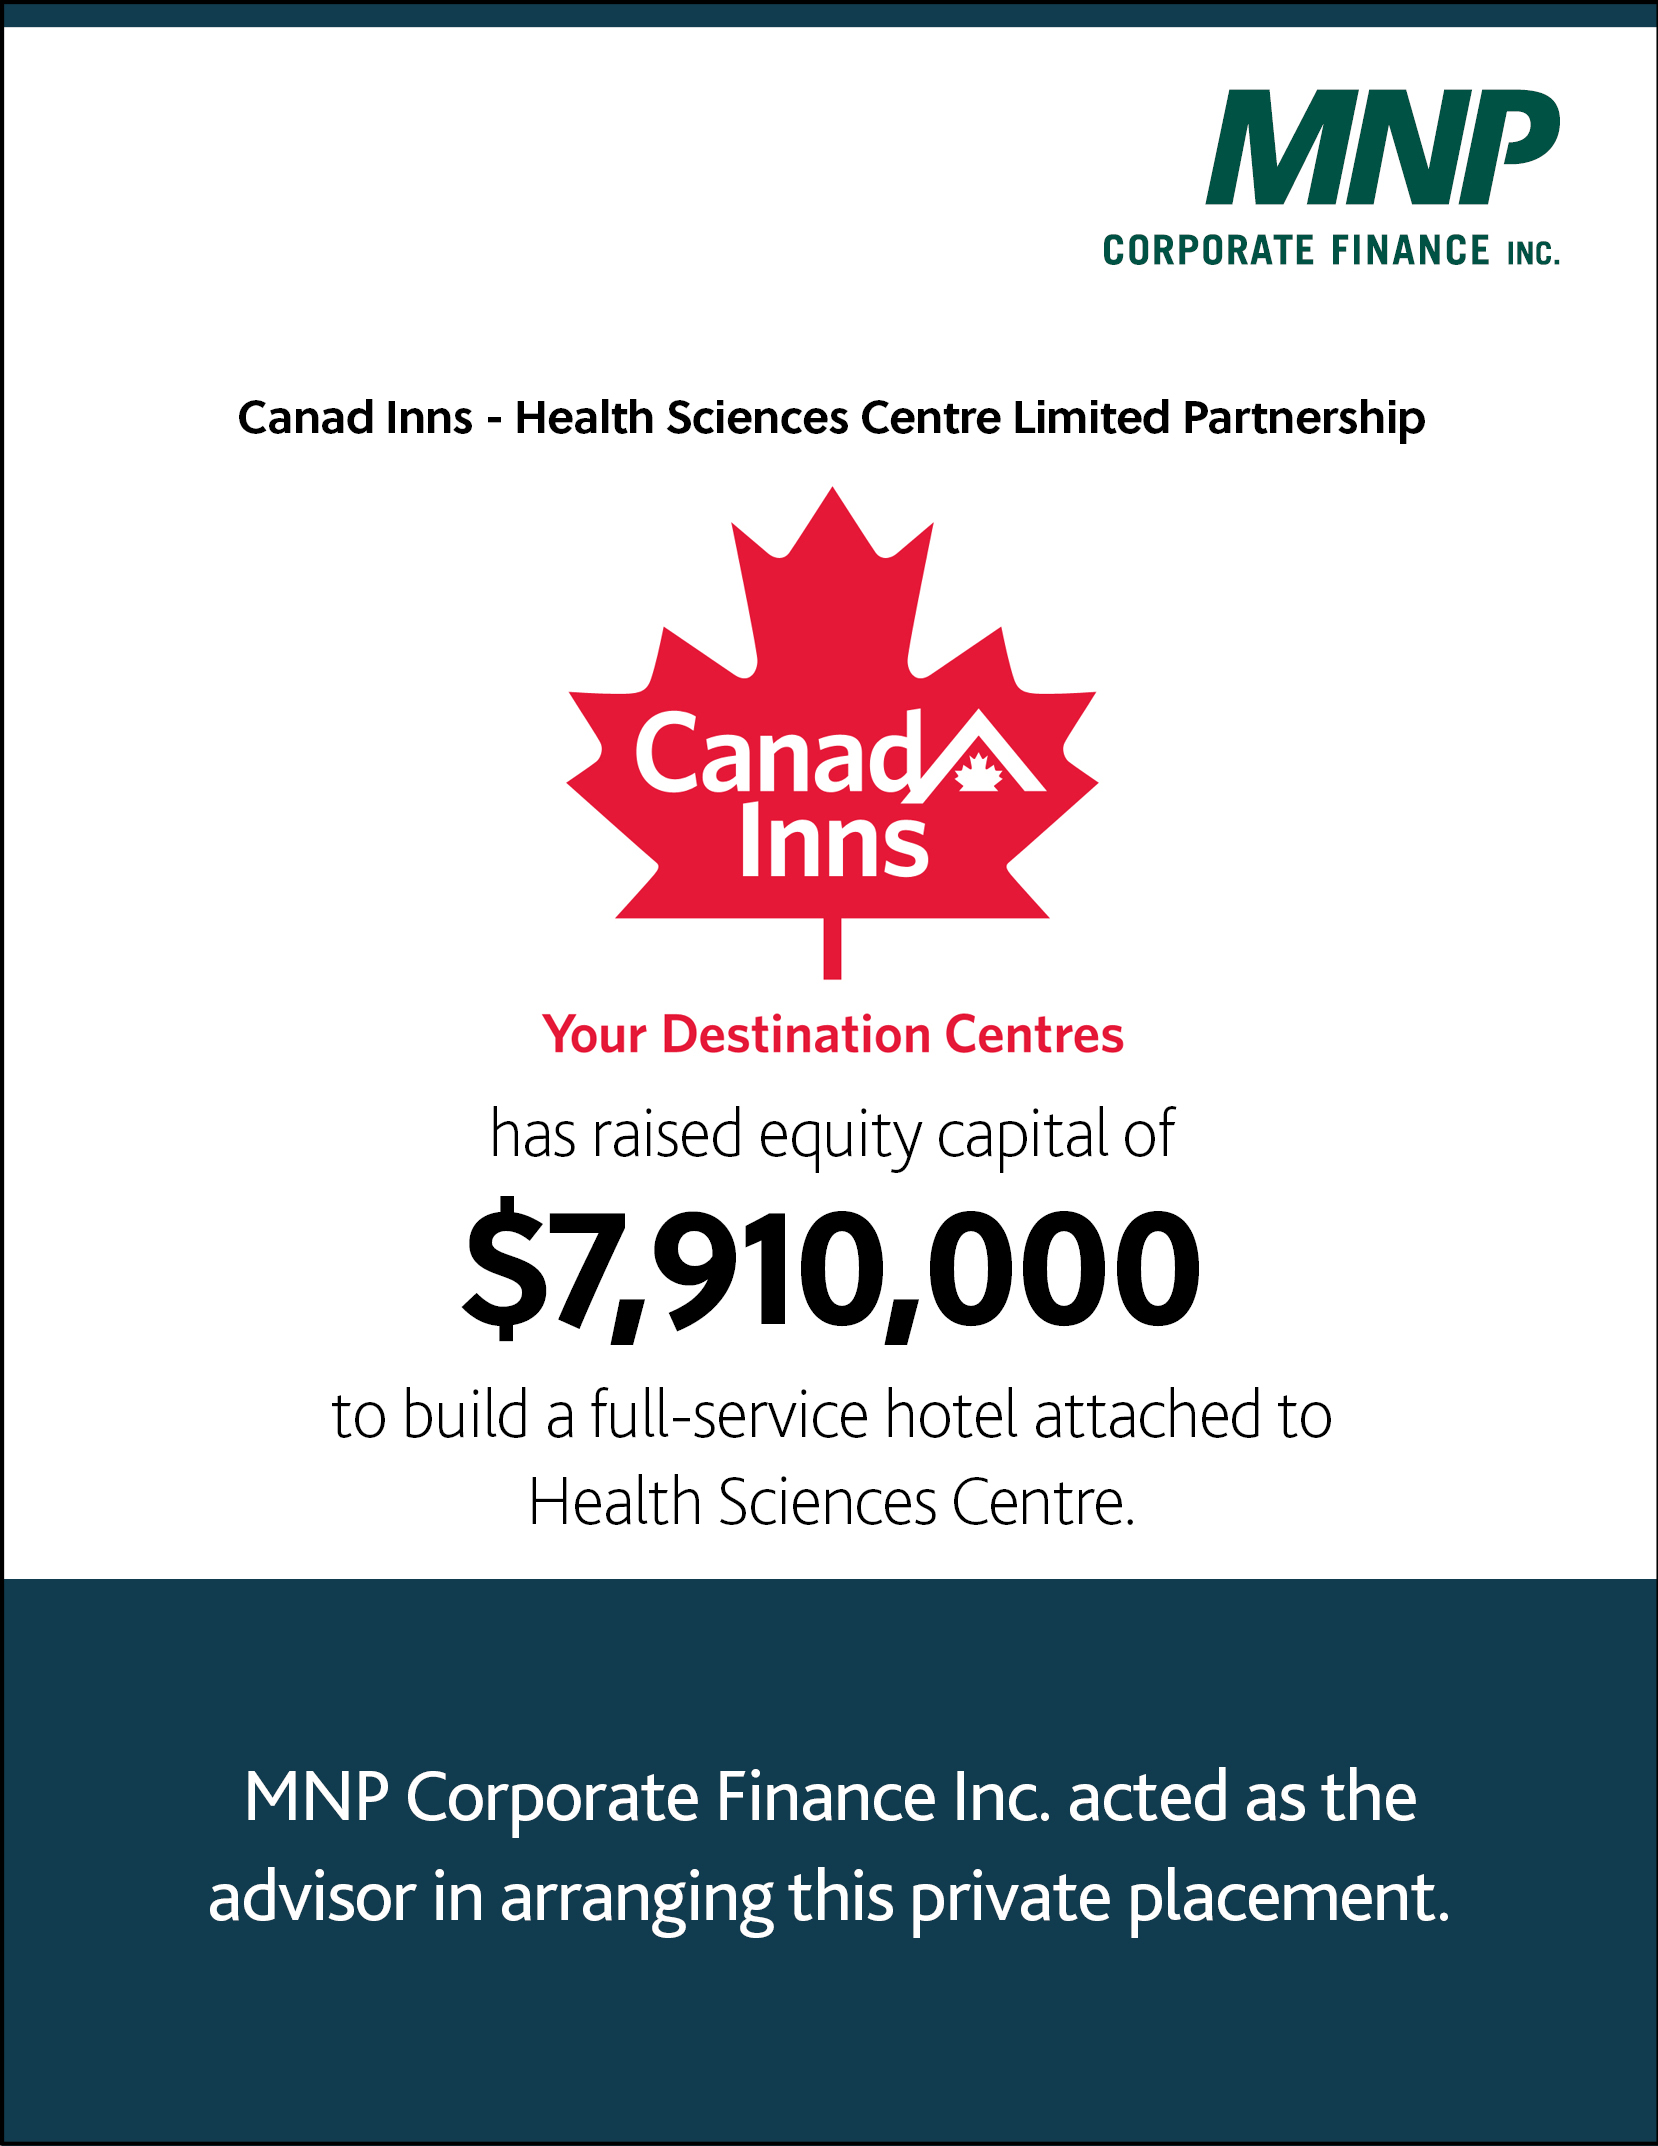 Canad Inns- Health Sciences Centre Limited Partnership has raised equity capital of $7,910,000 to build a full-service hotel attached to Health Sciences Centre 